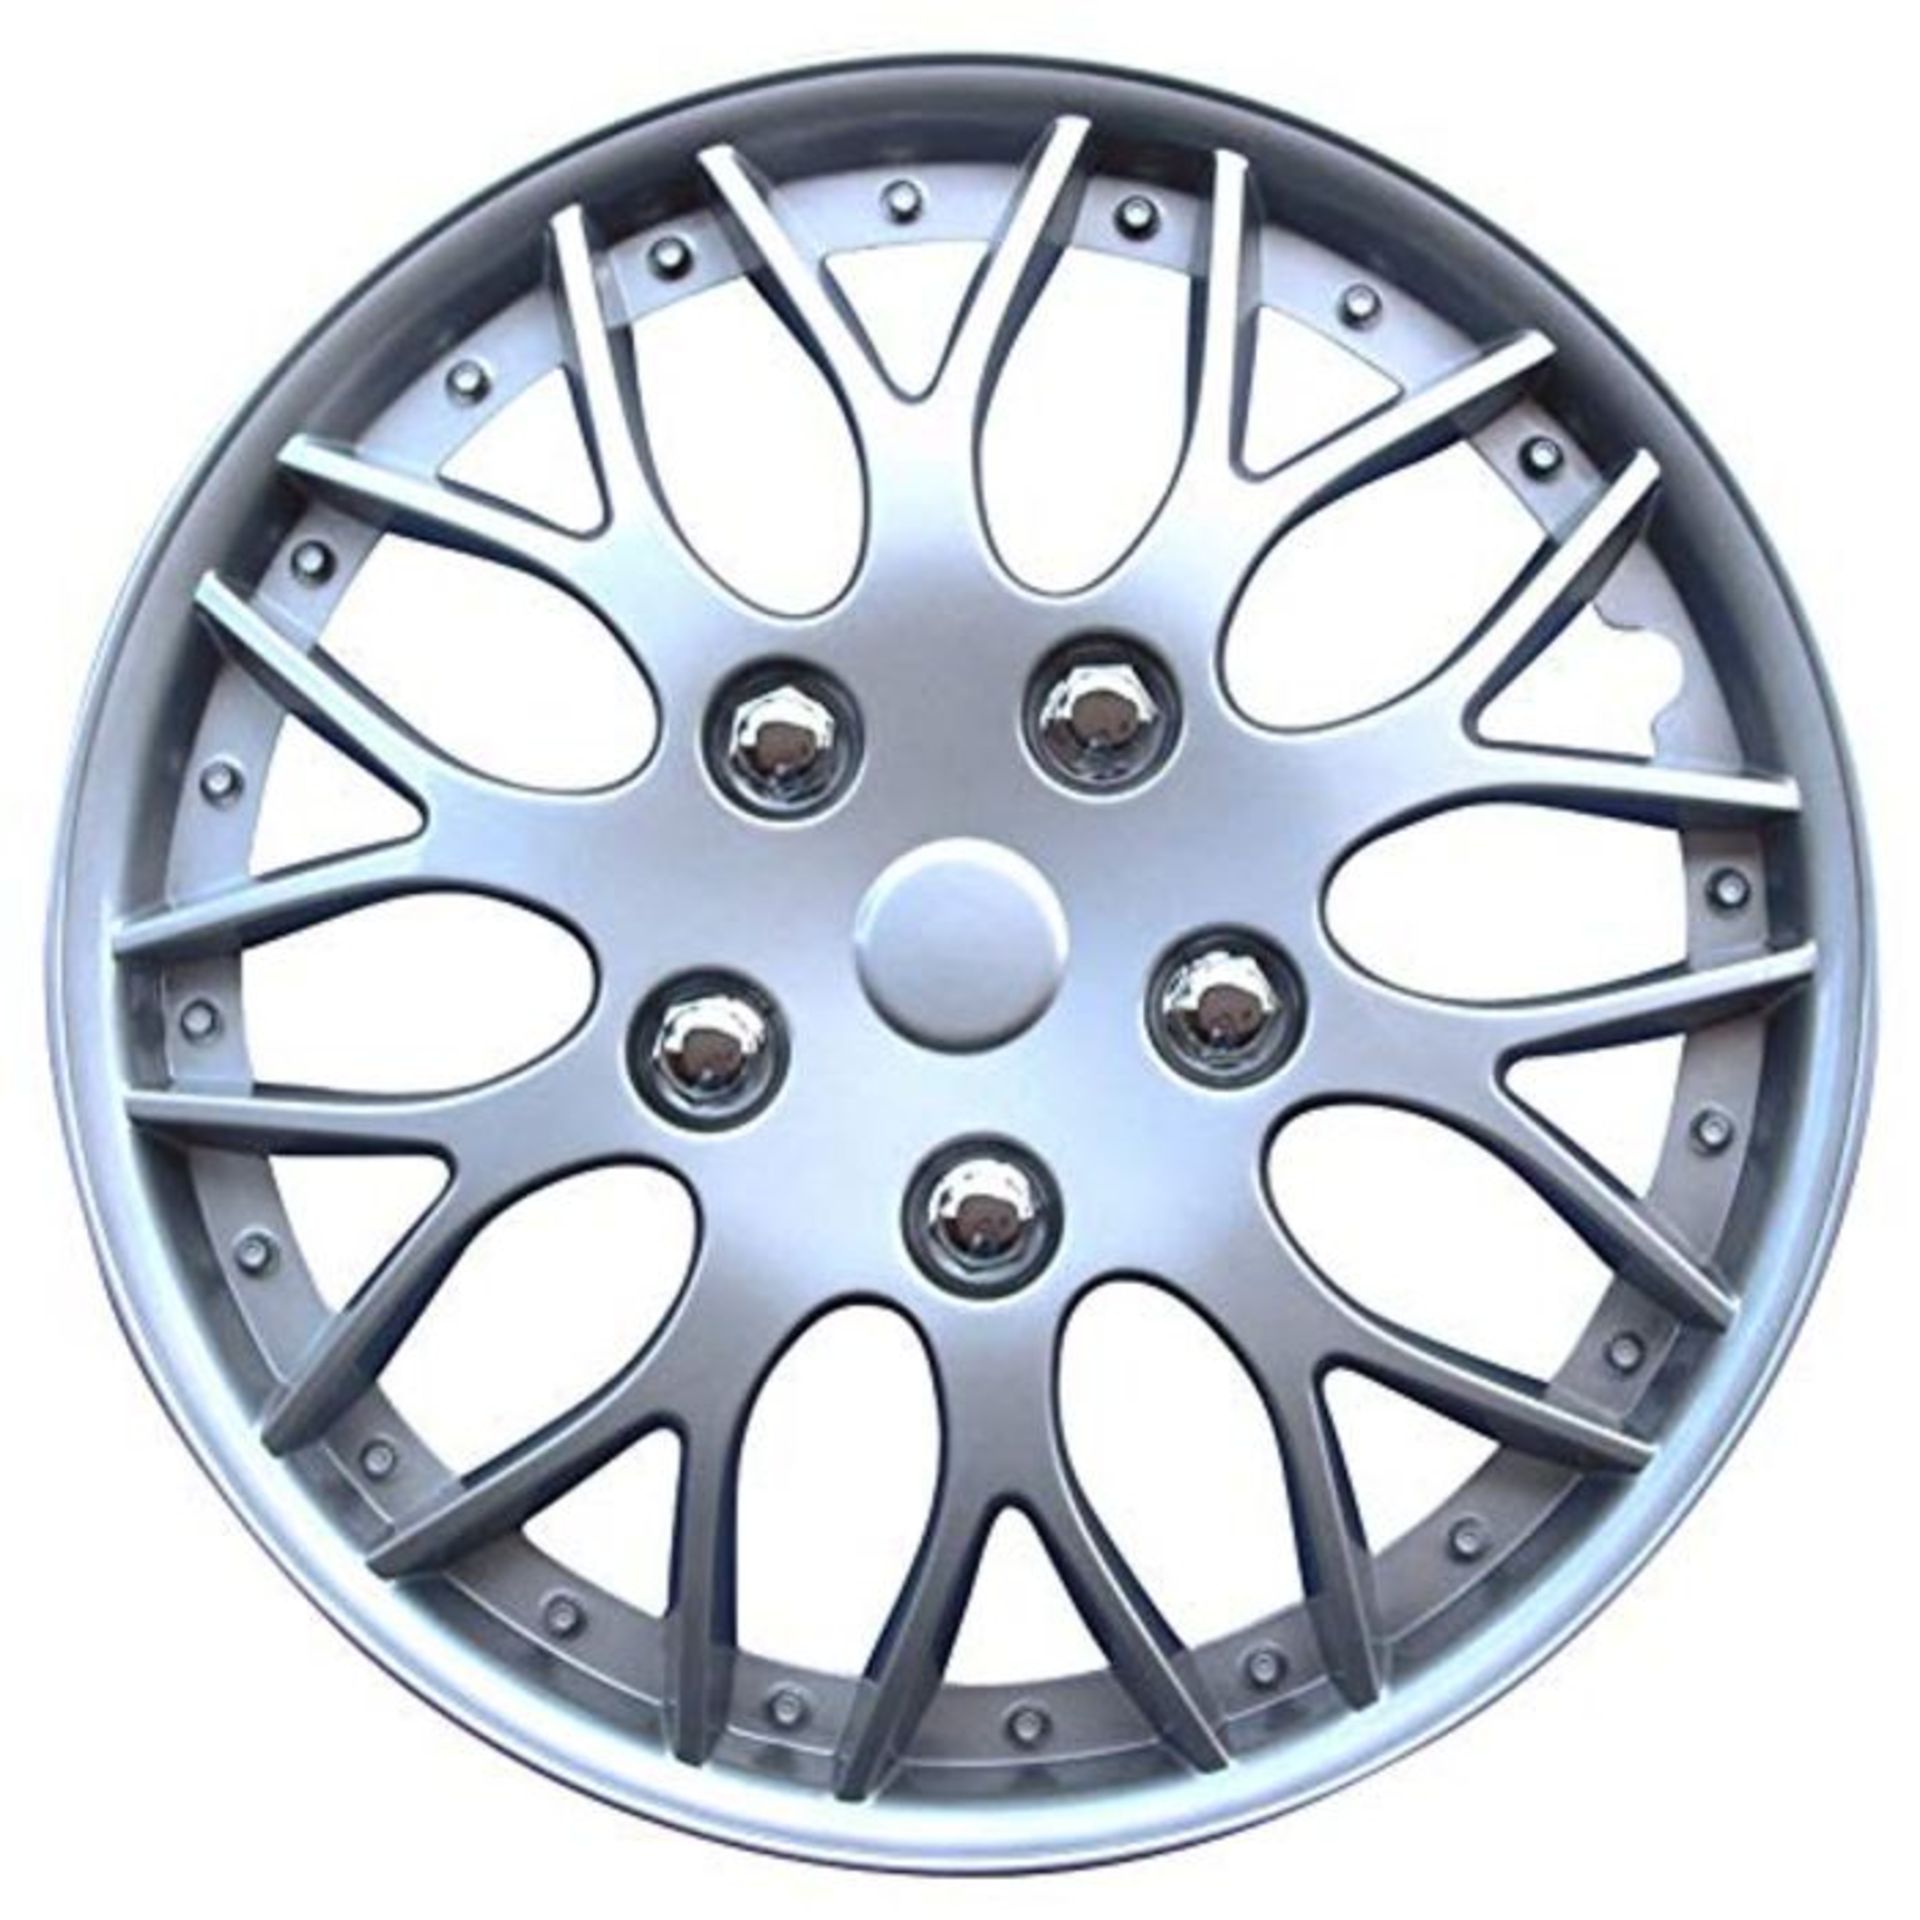 [CRACKED] AUTOSTYLE PP9703 Set wheel covers Missouri 13-inch silver